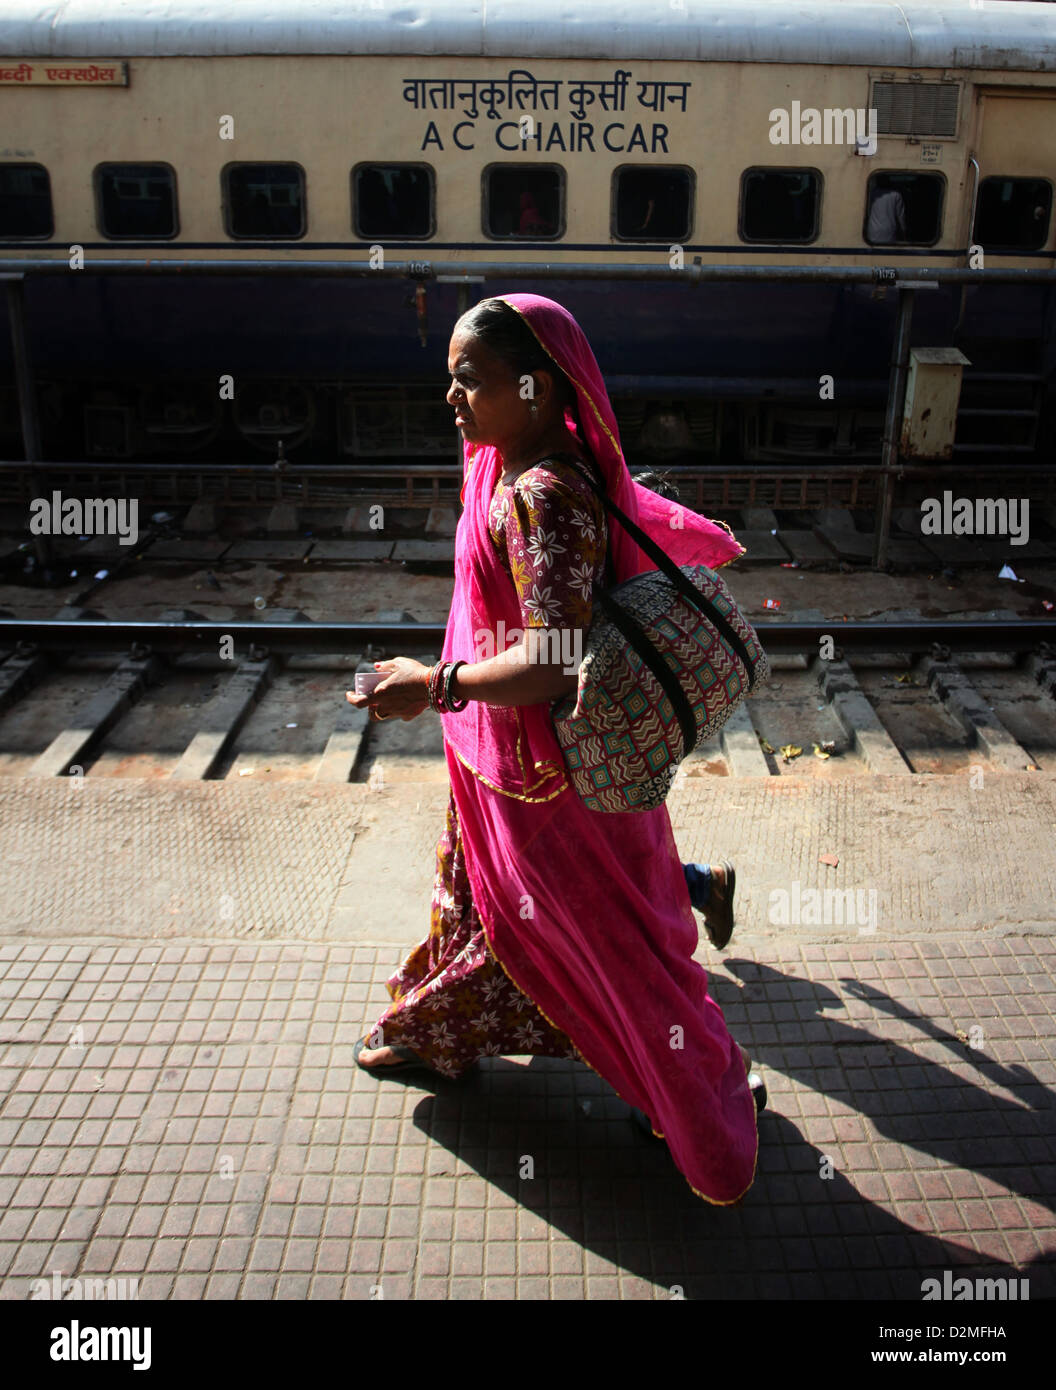 General view of a woman walking along the platform of Ajmer railway station in Rajasthan, India Stock Photo